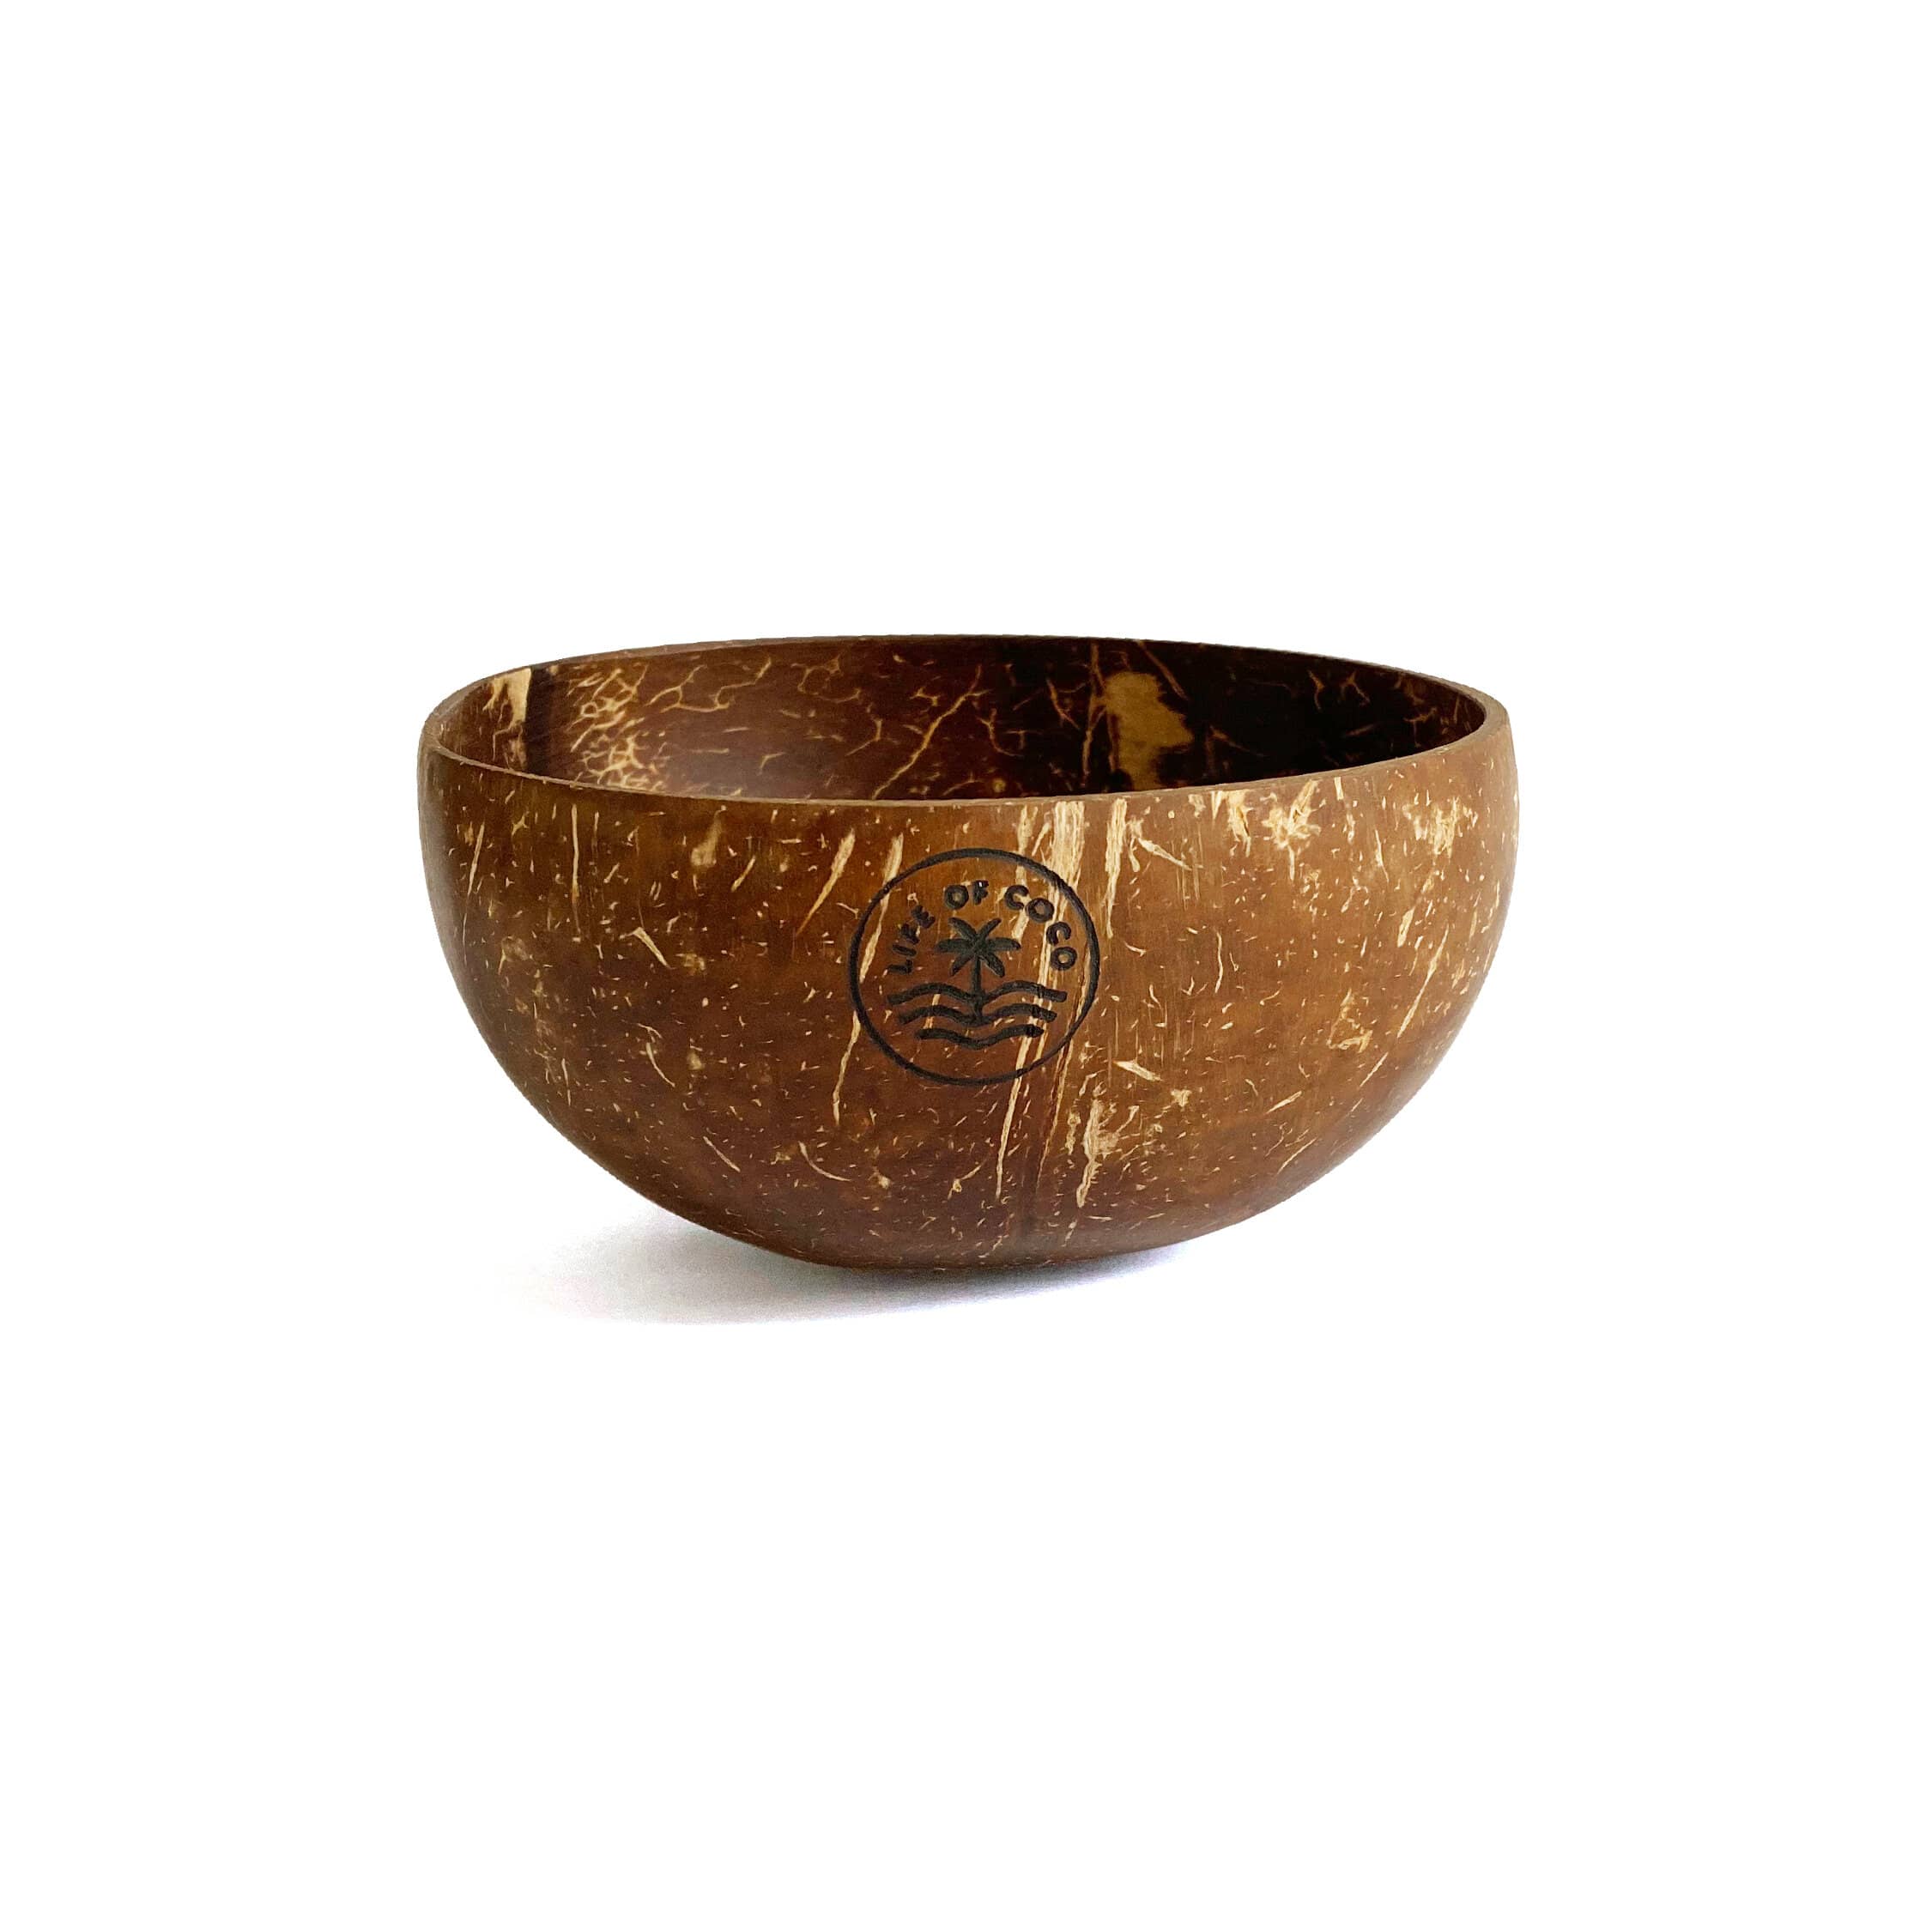 Coconut Bowl - Available in 2 Styles